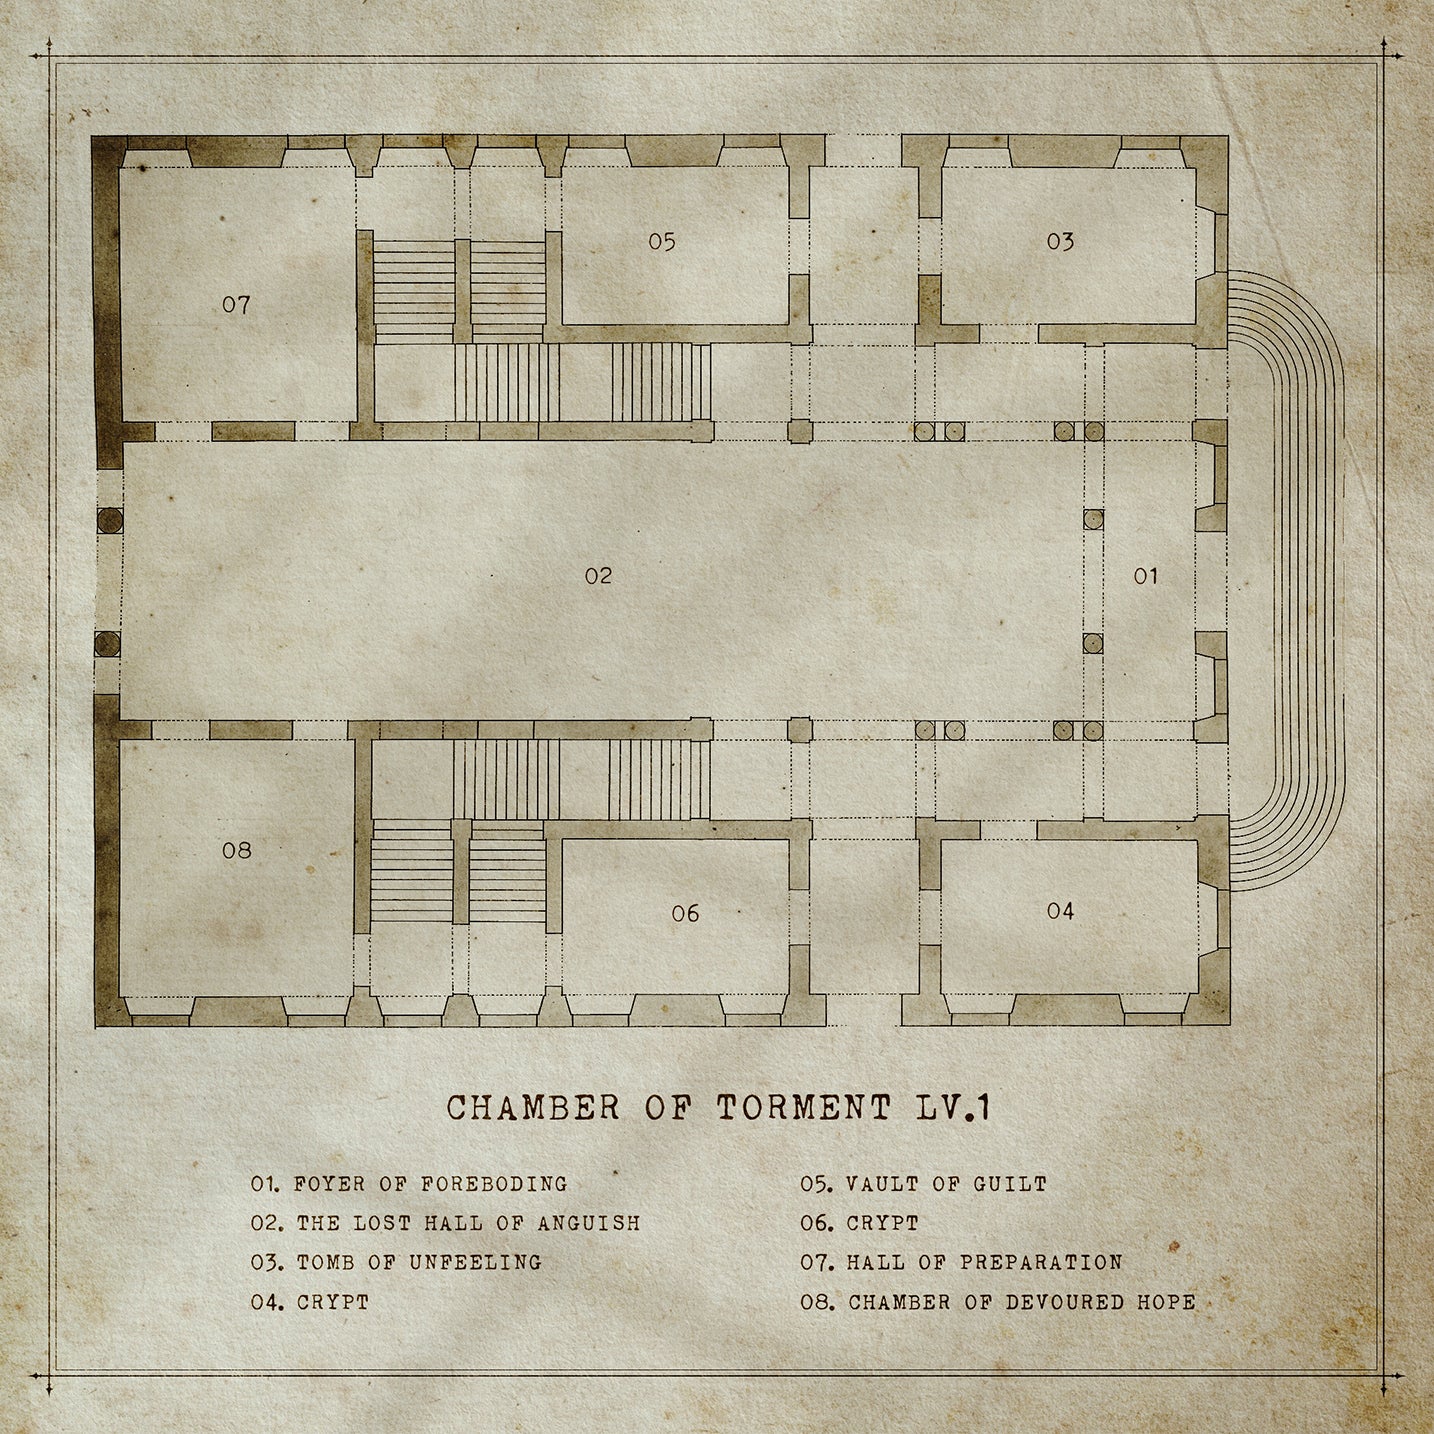 old looking dungeon map showing the merchant ledger font in use as the labelling text